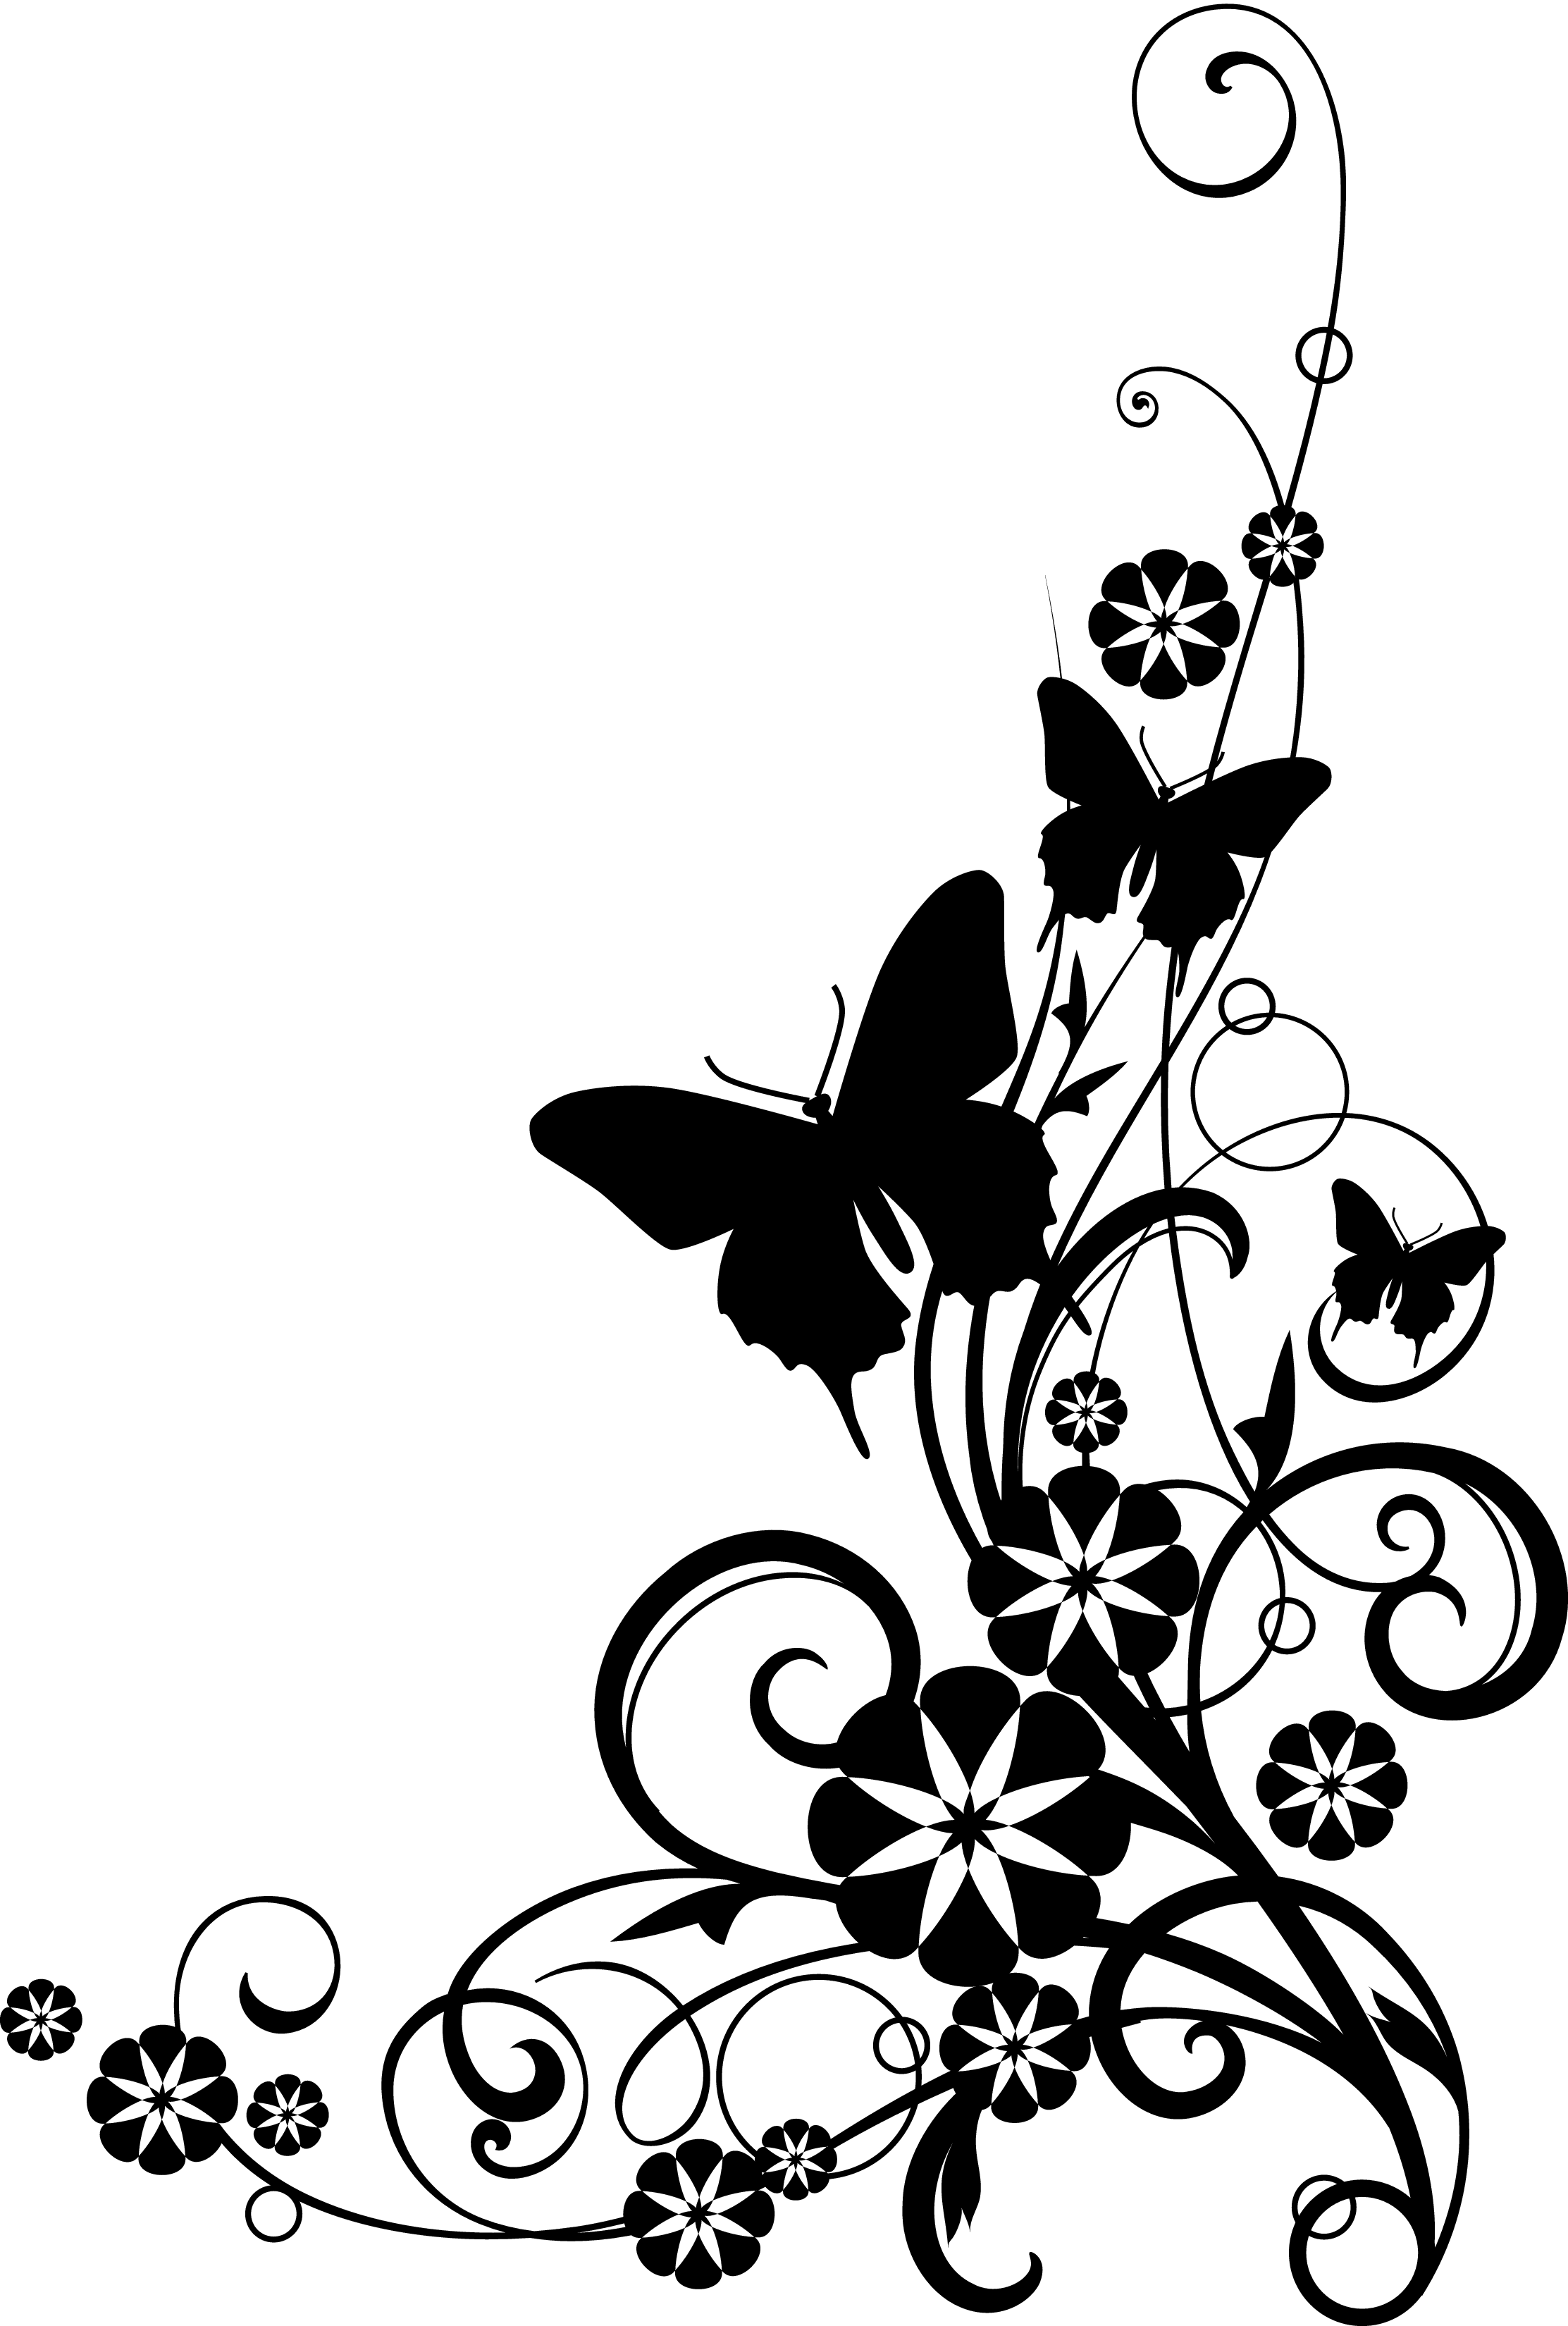 Flower Border Black And White Clip Art Hd Pictures 4 HD Wallpapers ...